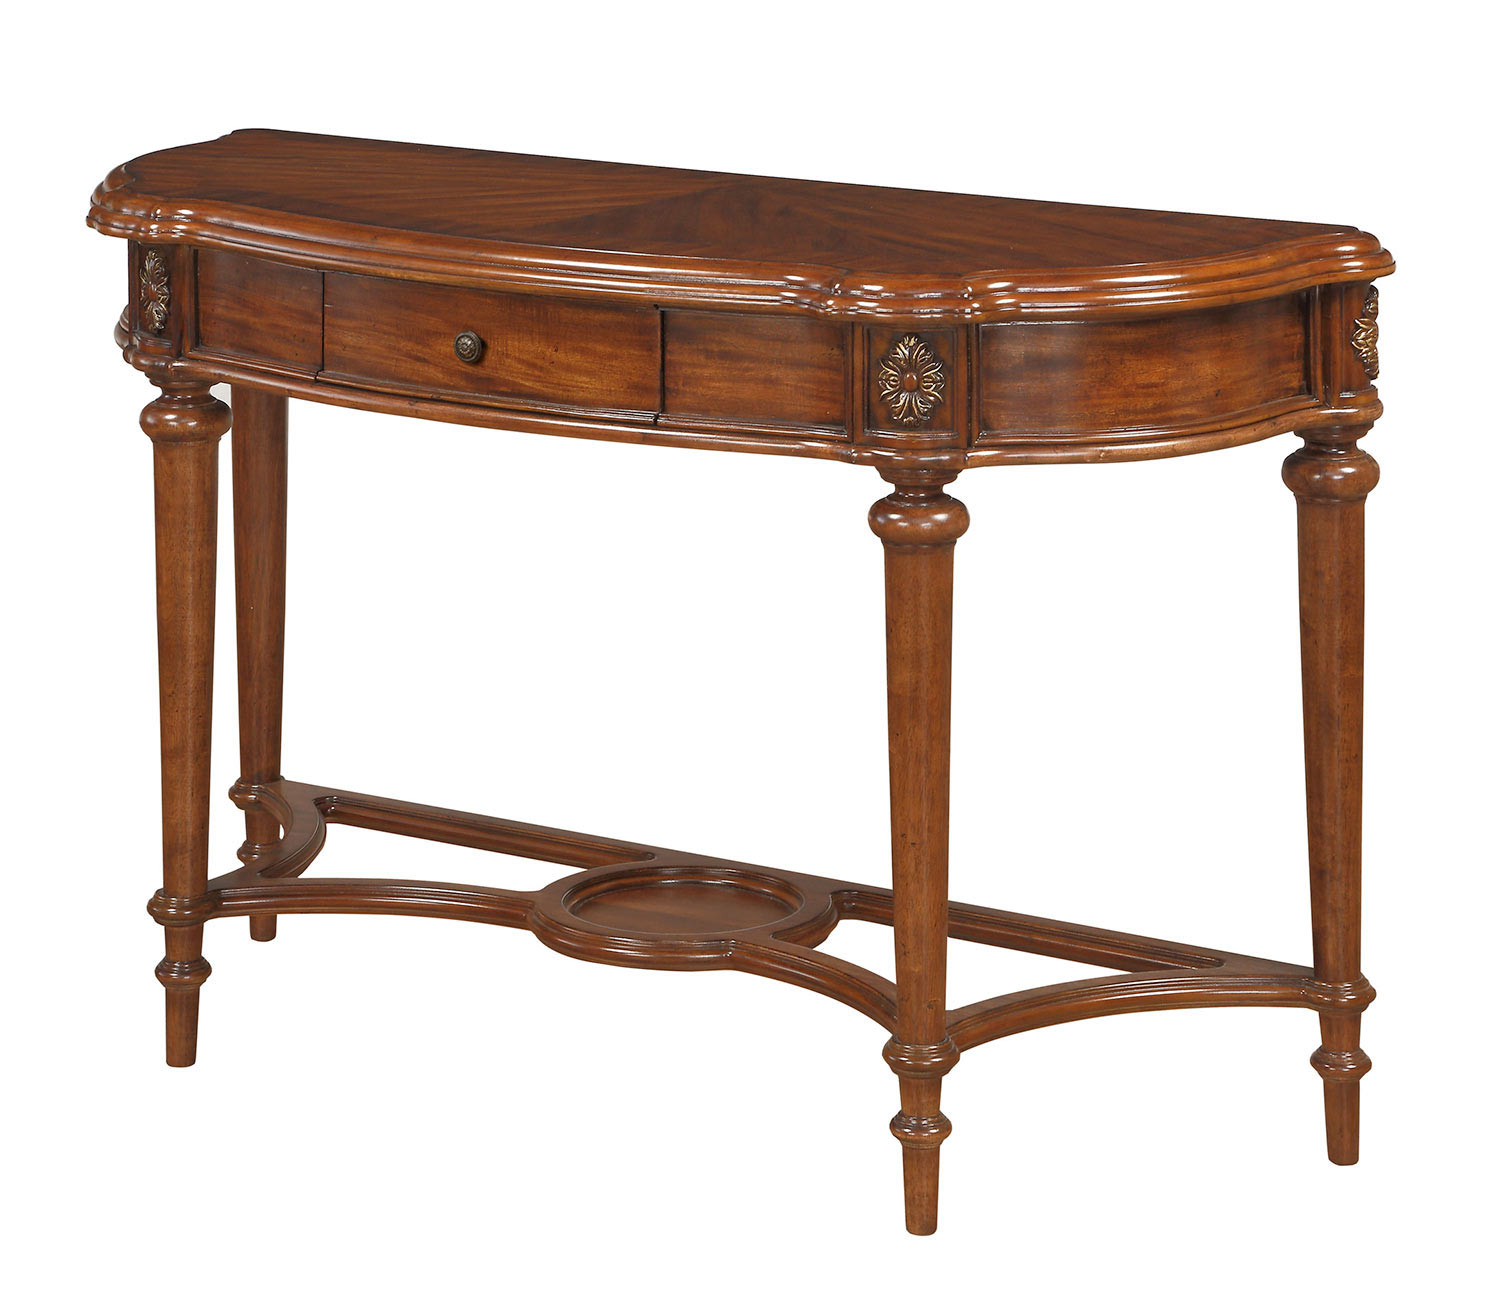 Homelegance Barbary Sofa Table with Functional Drawer - Cherry